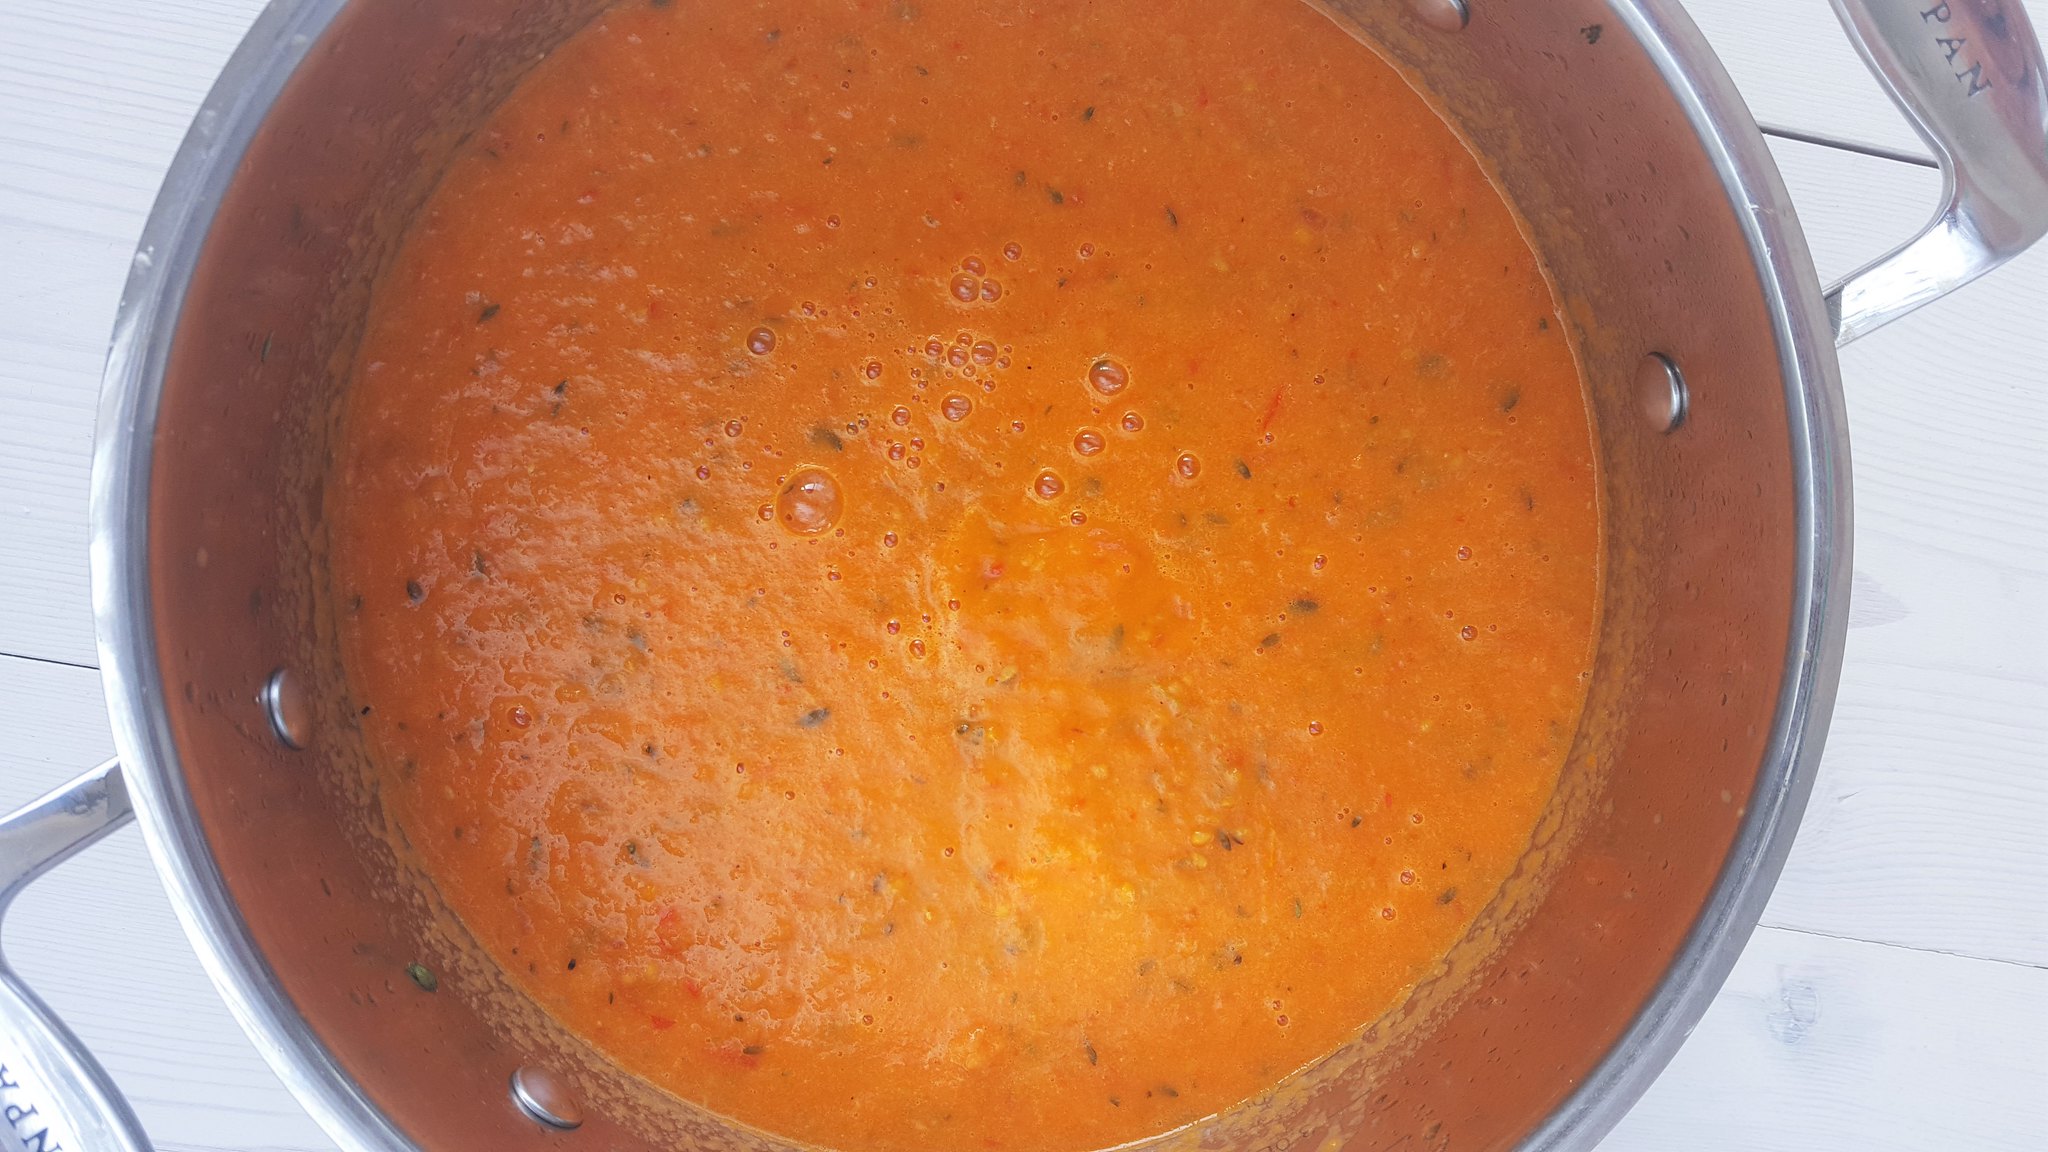 Recipe for homemade Roasted Tomato Soup